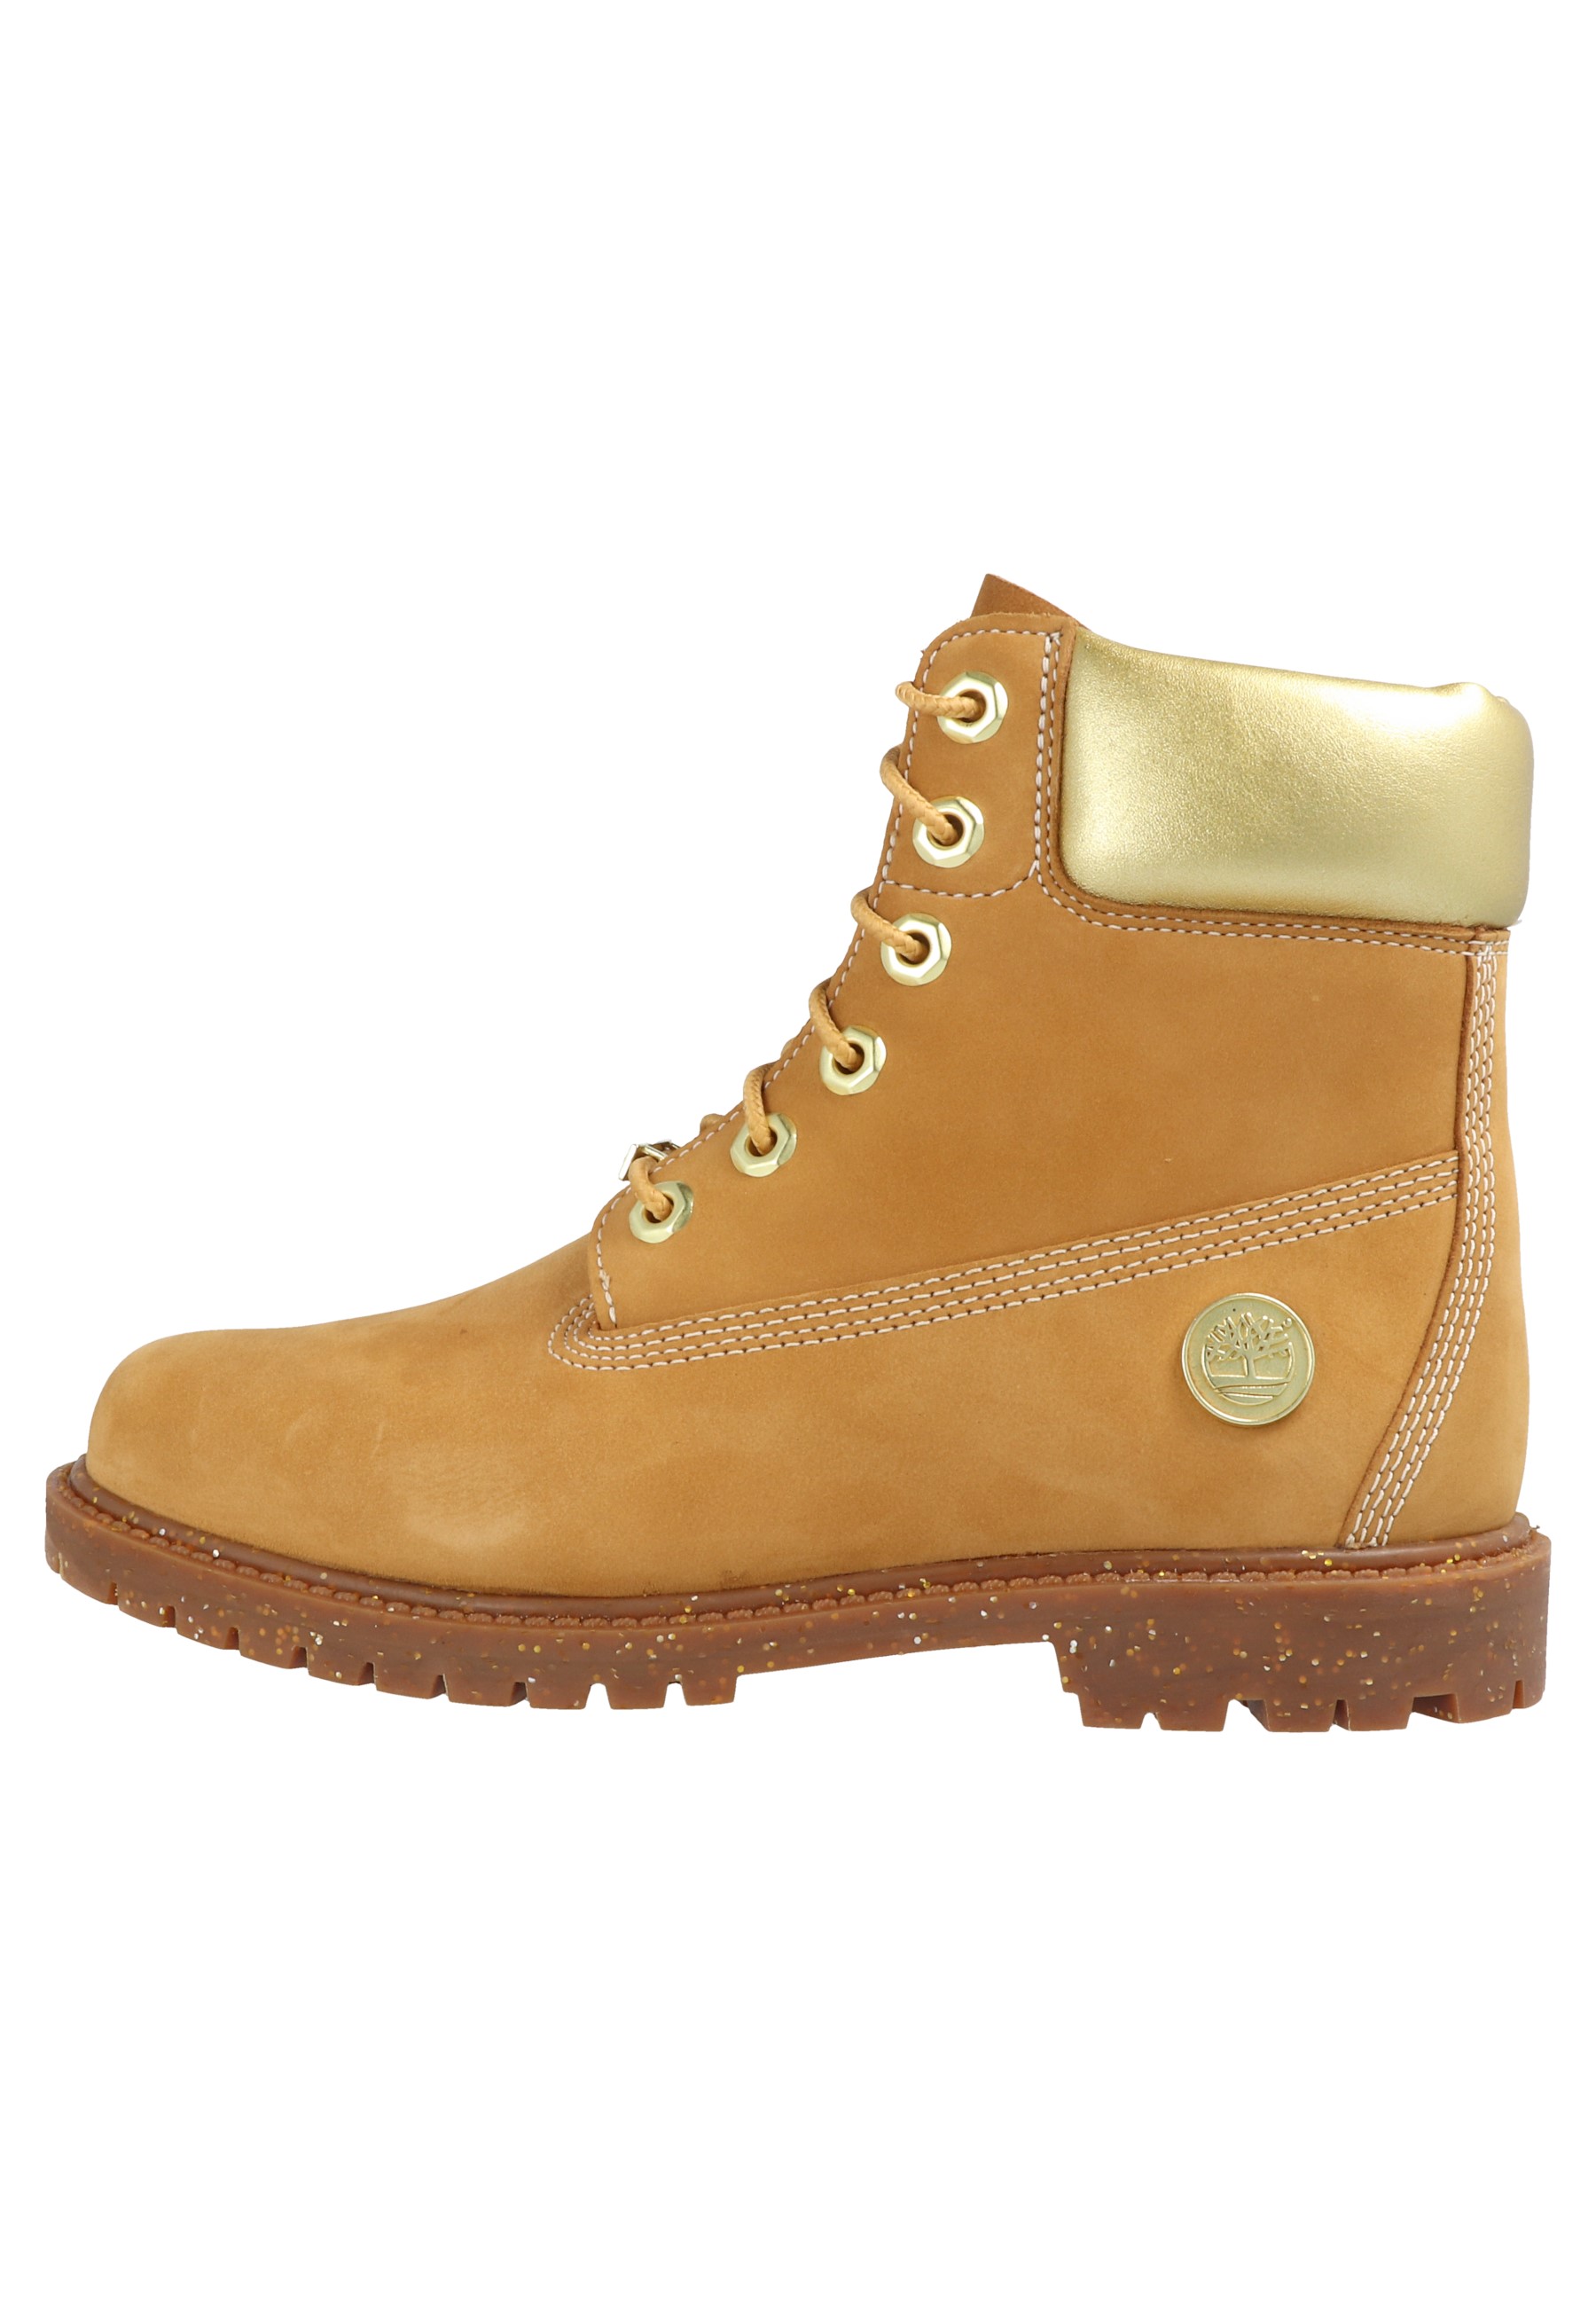 6in Heritage Boot - Boots